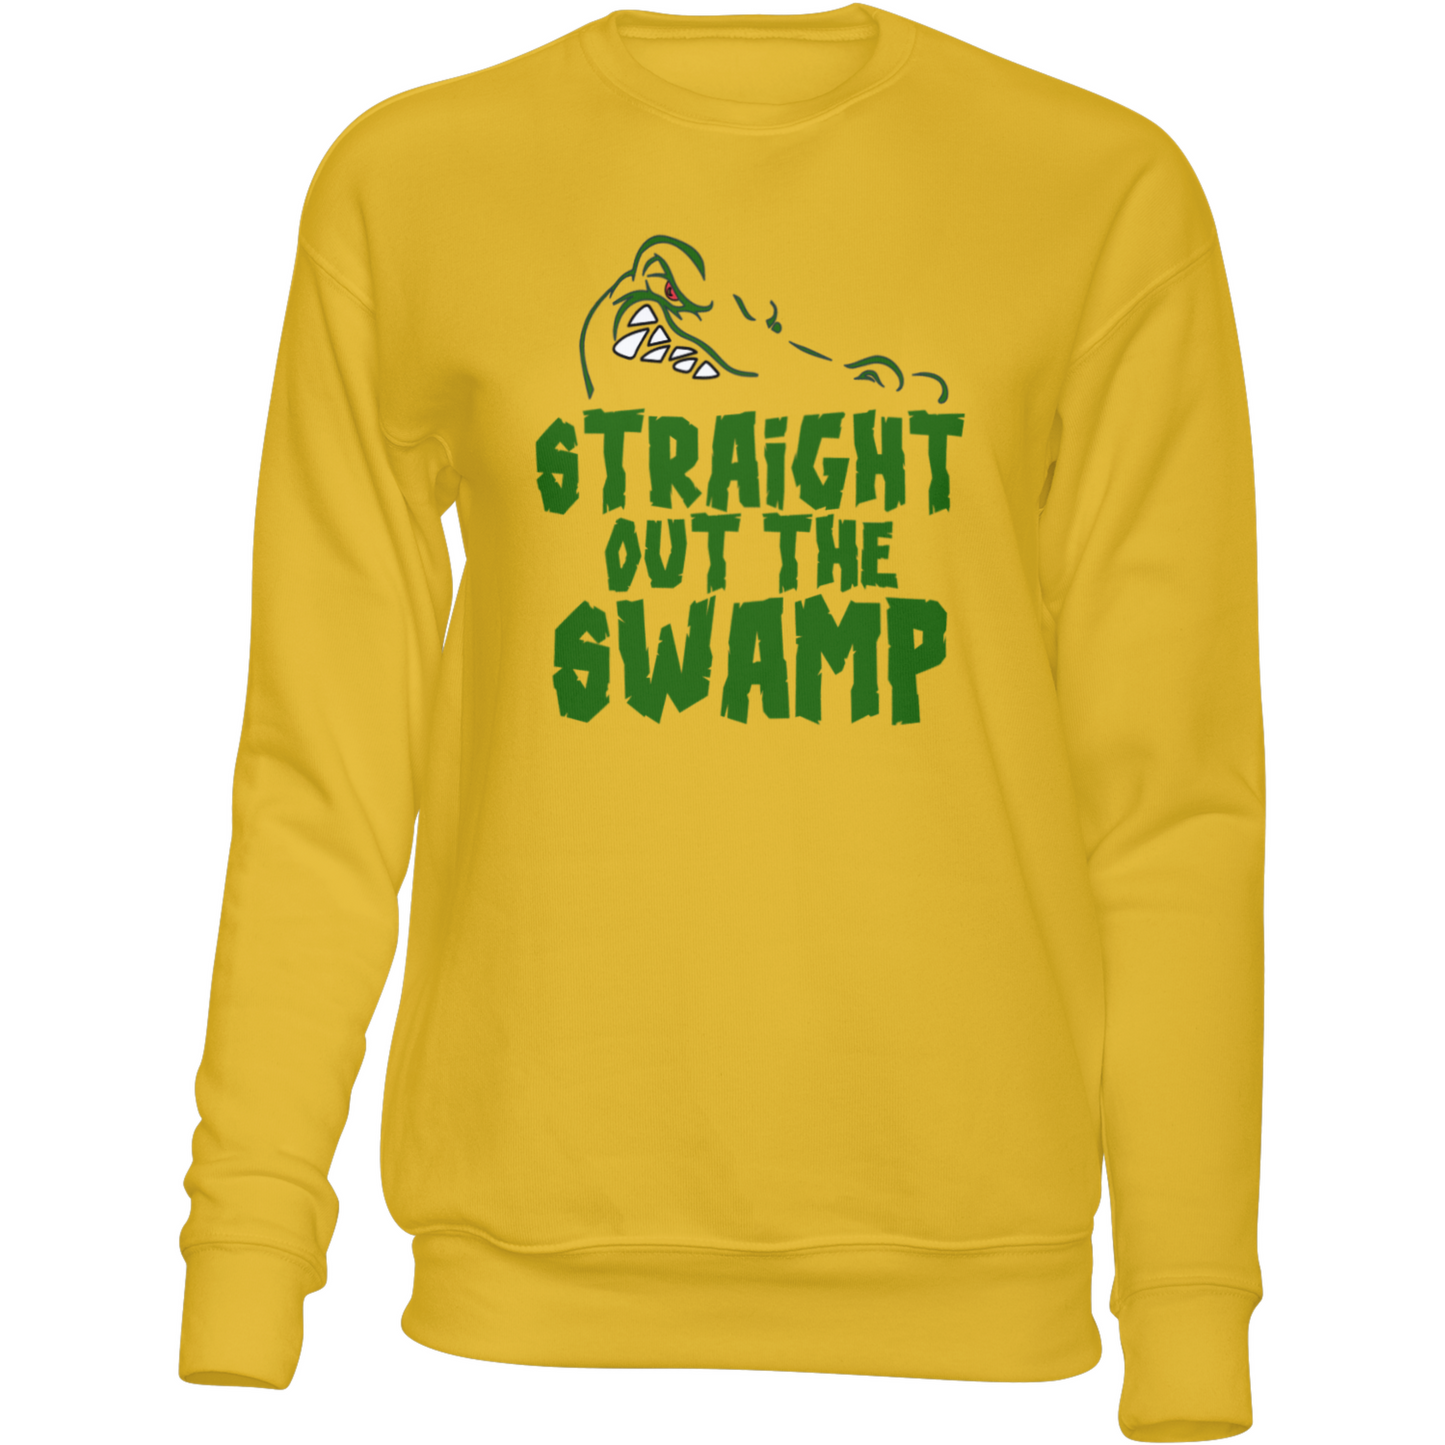 Straight Out the Swamp